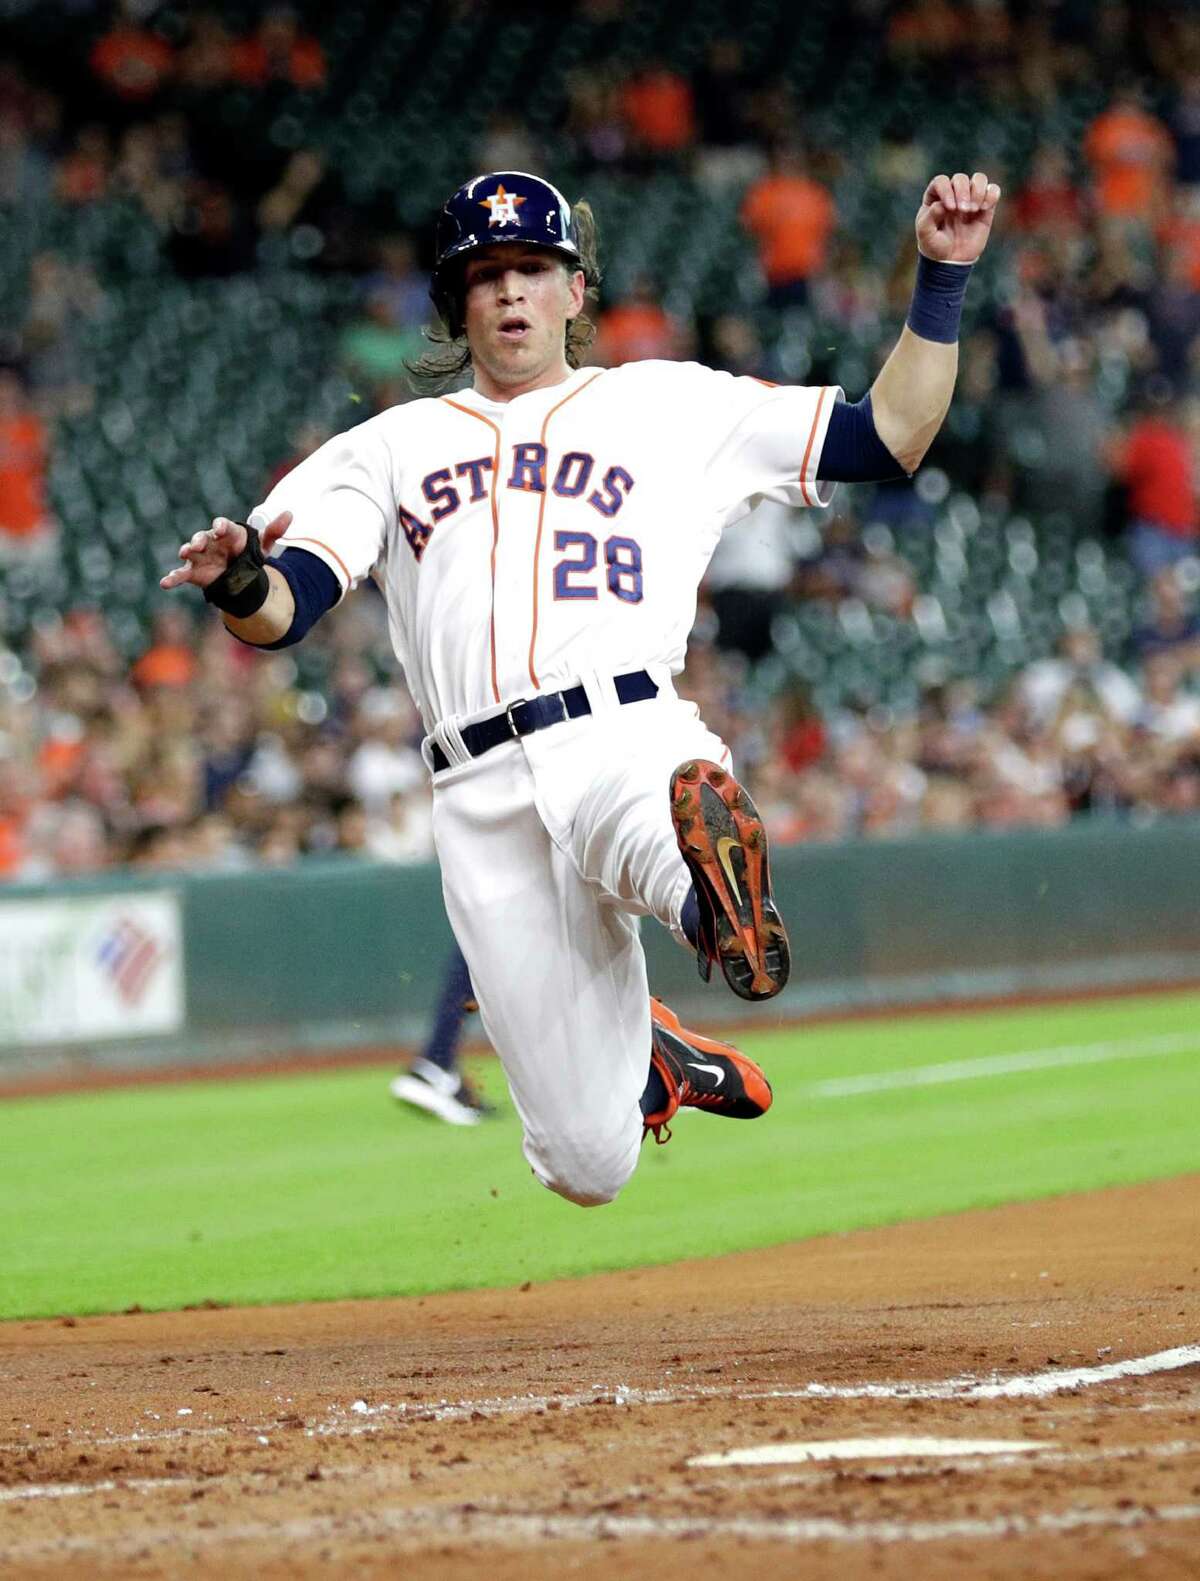 Astros’ Colby Rasmus slides into home plate to score a run during the first inning against the Los Angeles Angels on June 20, 2016, in Houston.